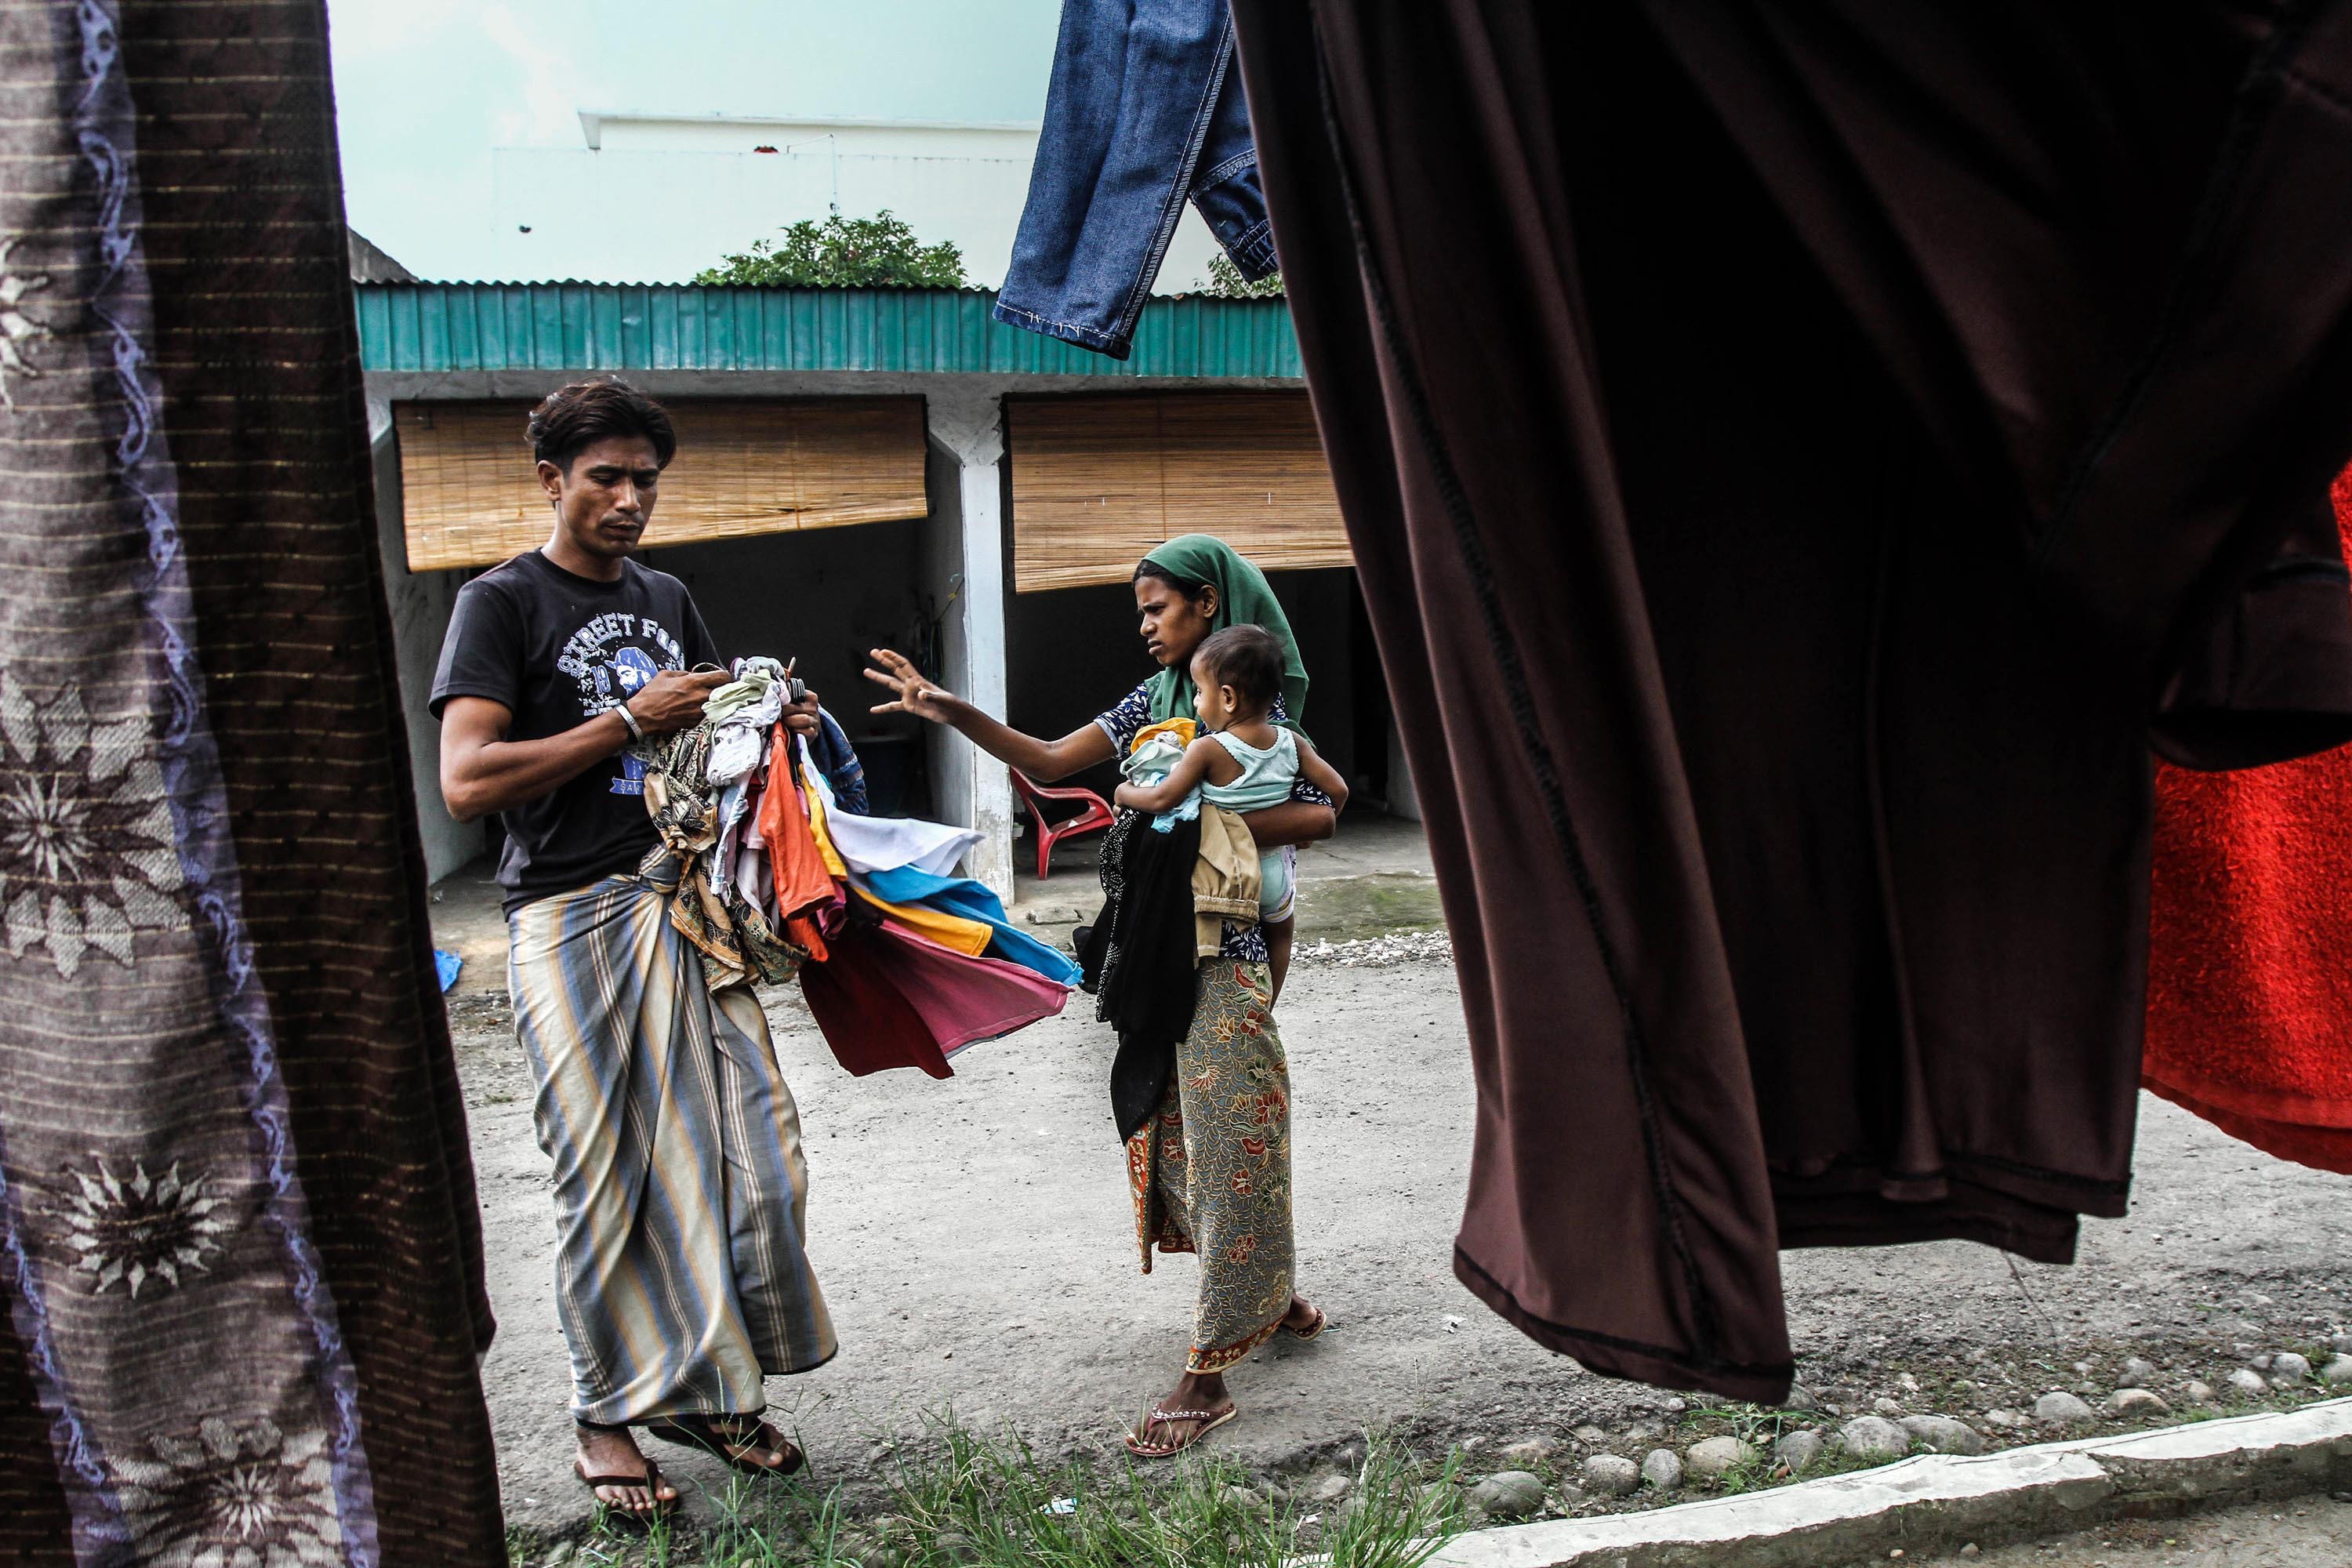 Asylum seekers who fled war to reach Indonesia have been told there is almost no chance of them being permanently settled in a third country. Many deal with depression and suicidal thoughts as they struggle to feed their children